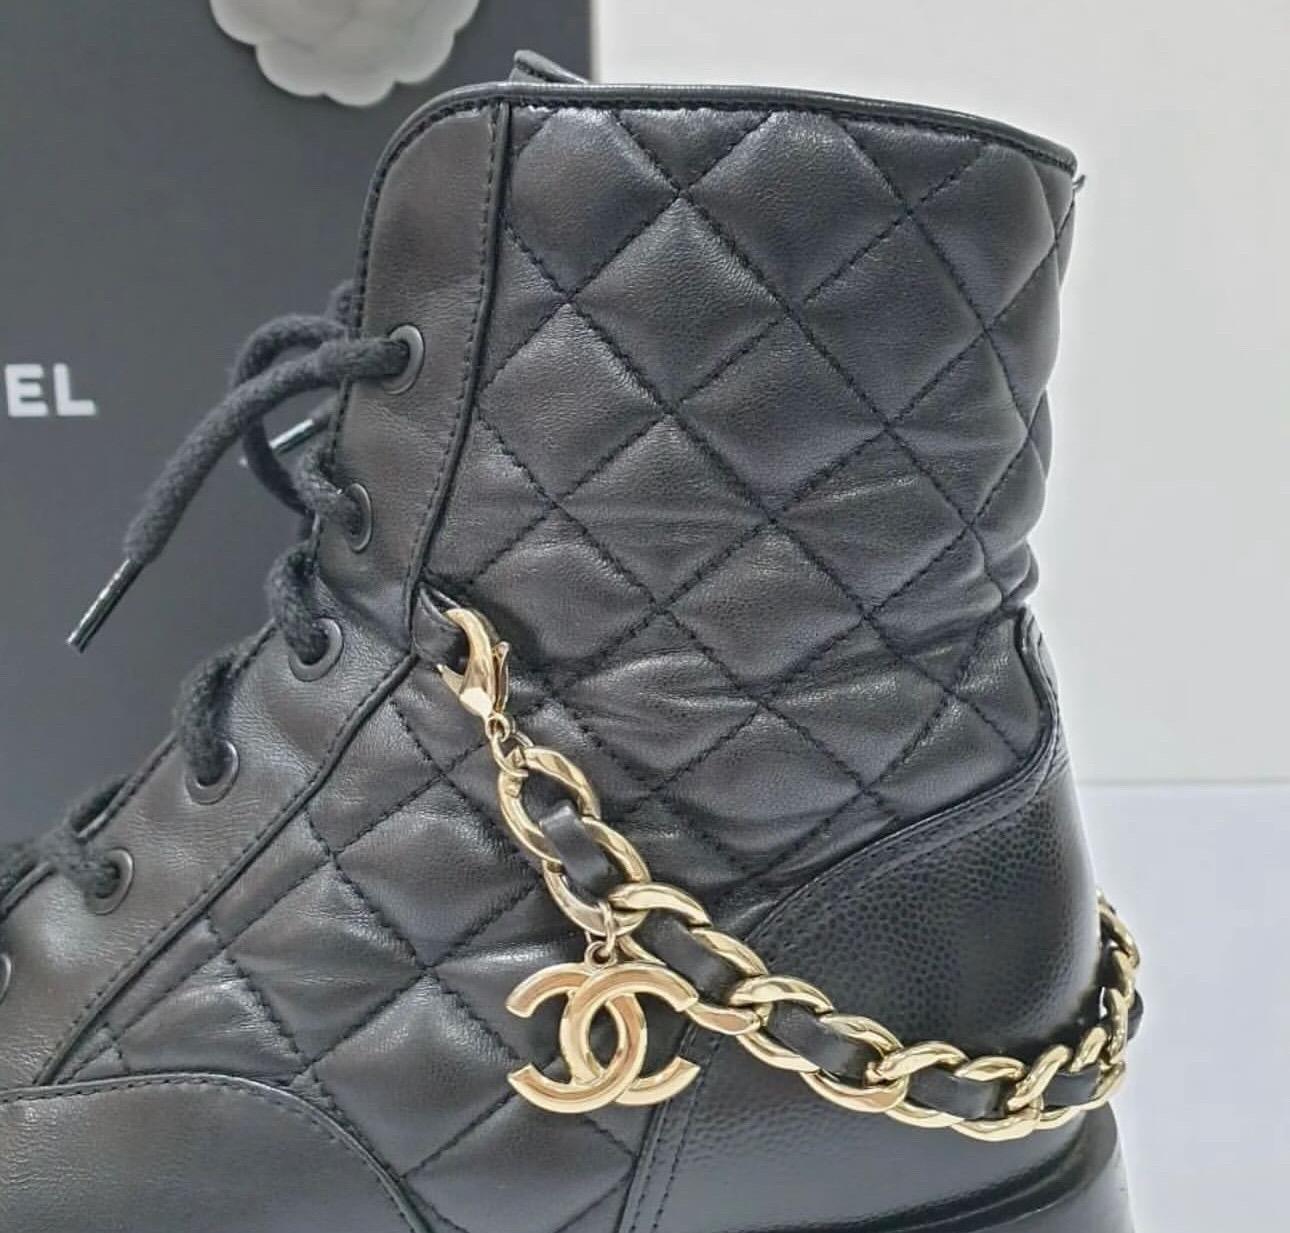 Chanel Coco Mark 22B Leather Boots Ladies' Black Chain Matelasse
Sz.37,5
Very good condition.
No box. No dust bag.